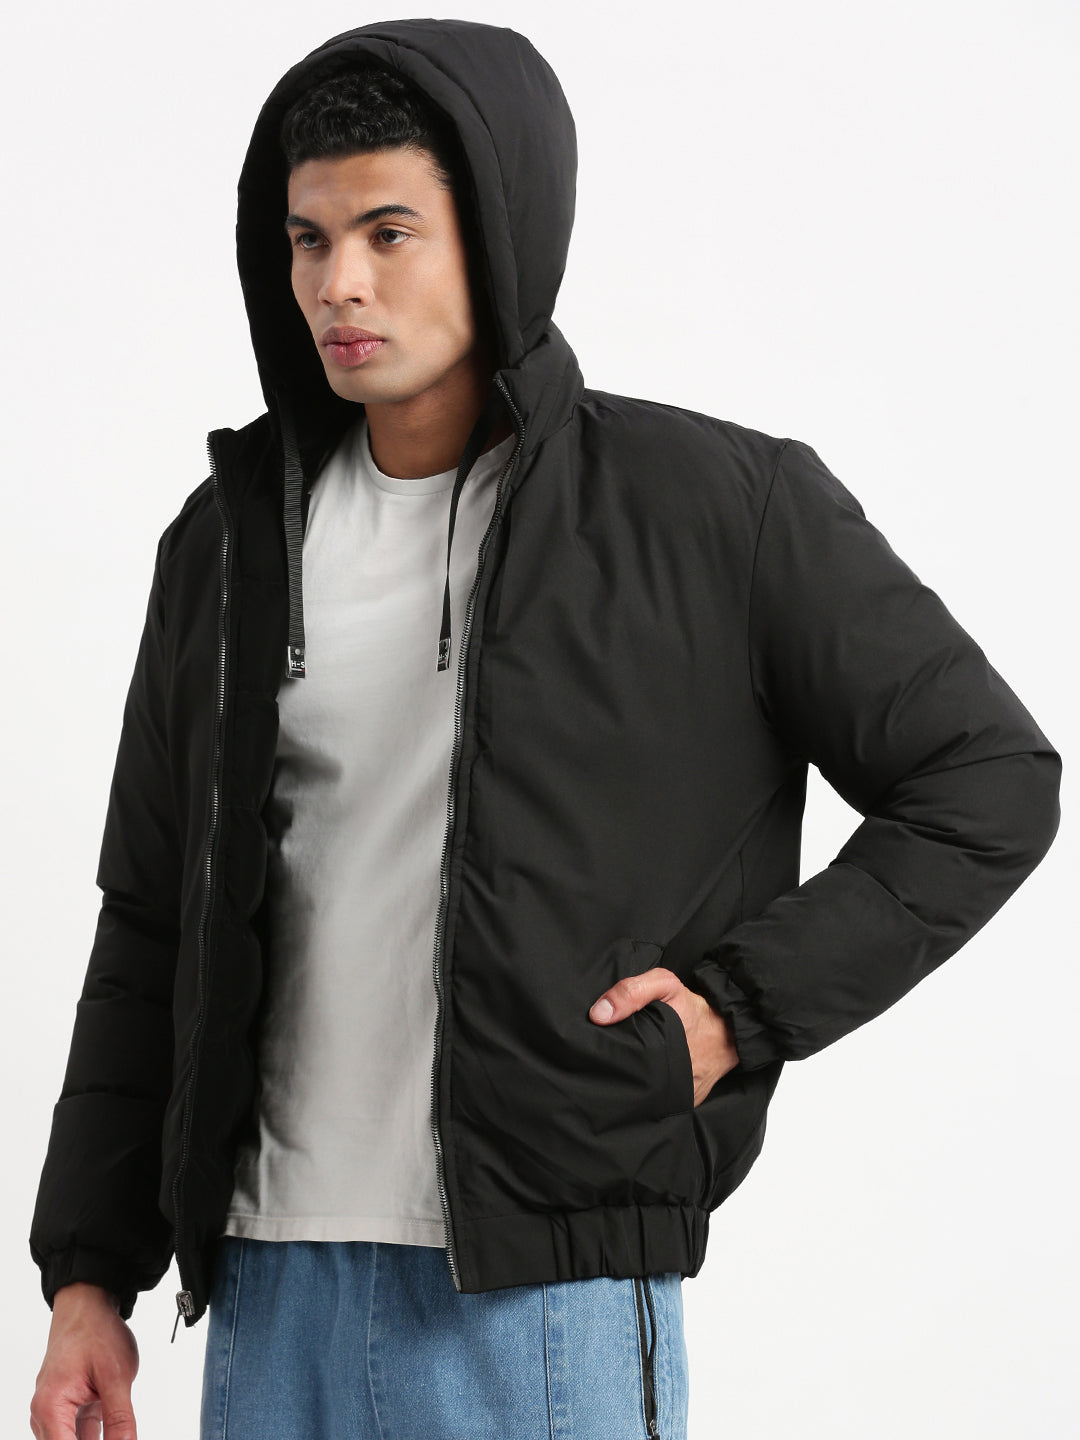 Men Mock Collar Black Solid Reversible Puffer Jacket comes with Detachable Hoodie